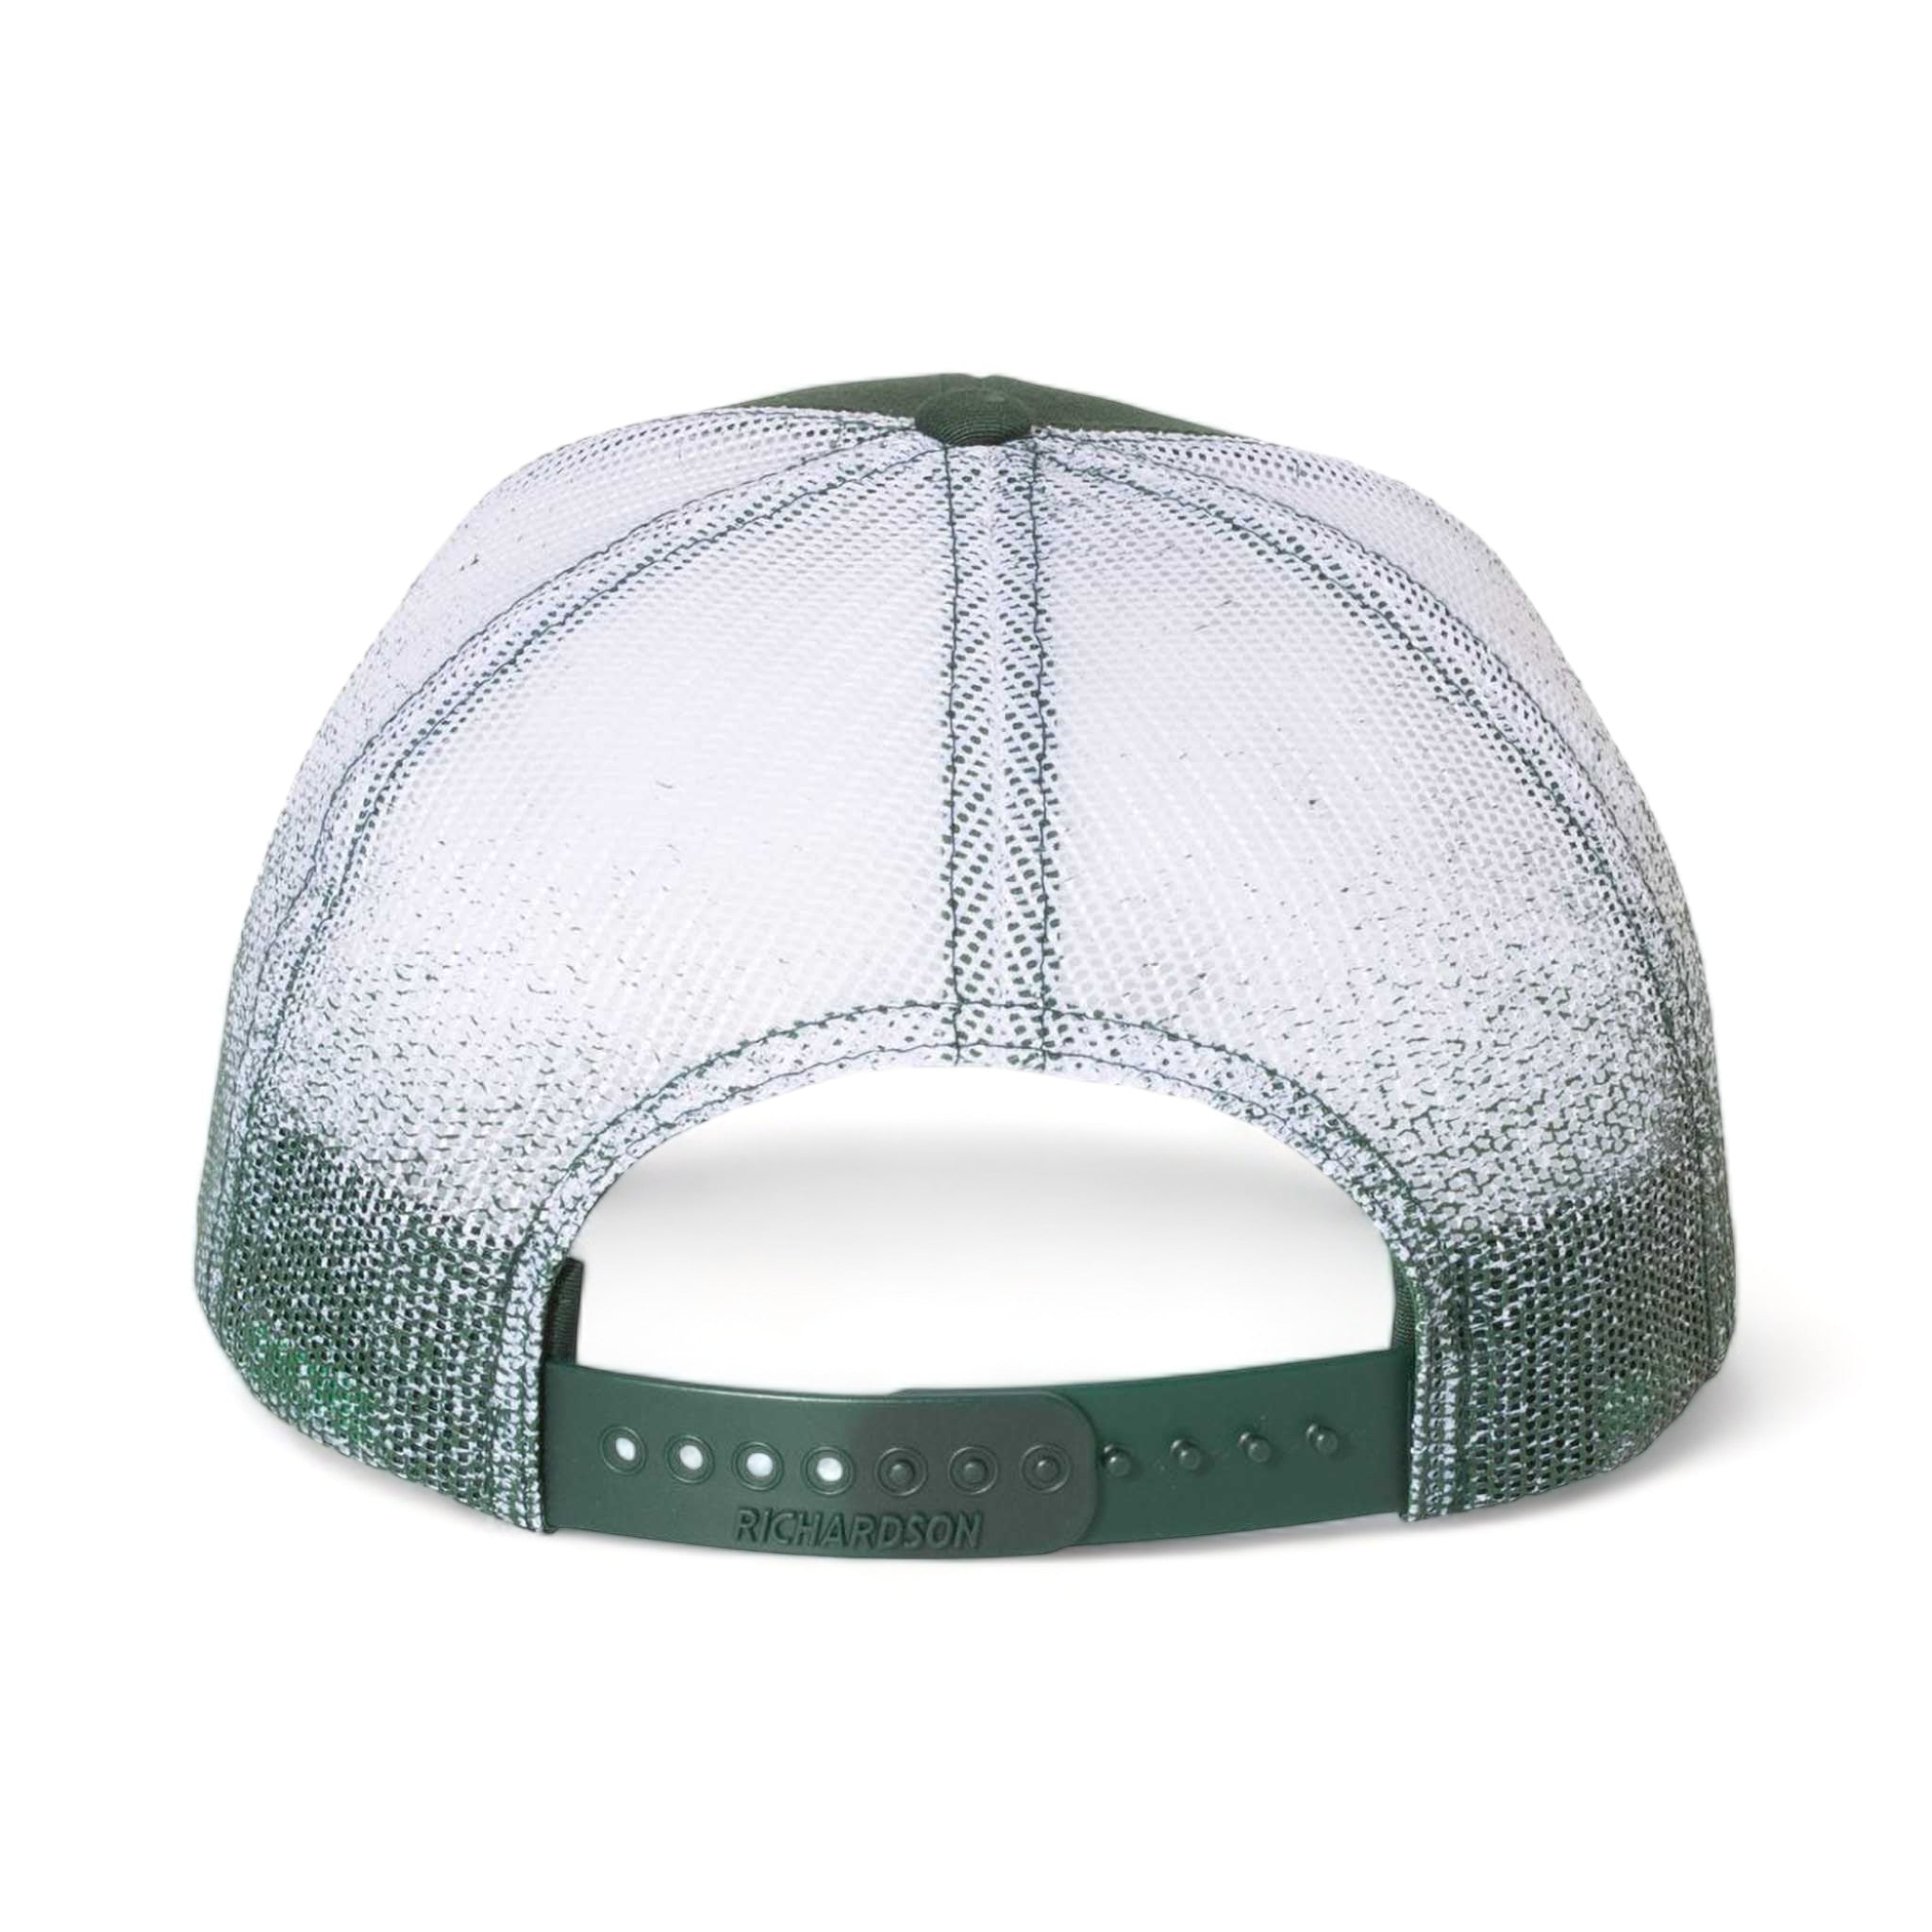 Back view of Richardson 112PM custom hat in dark green and dark green to white fade